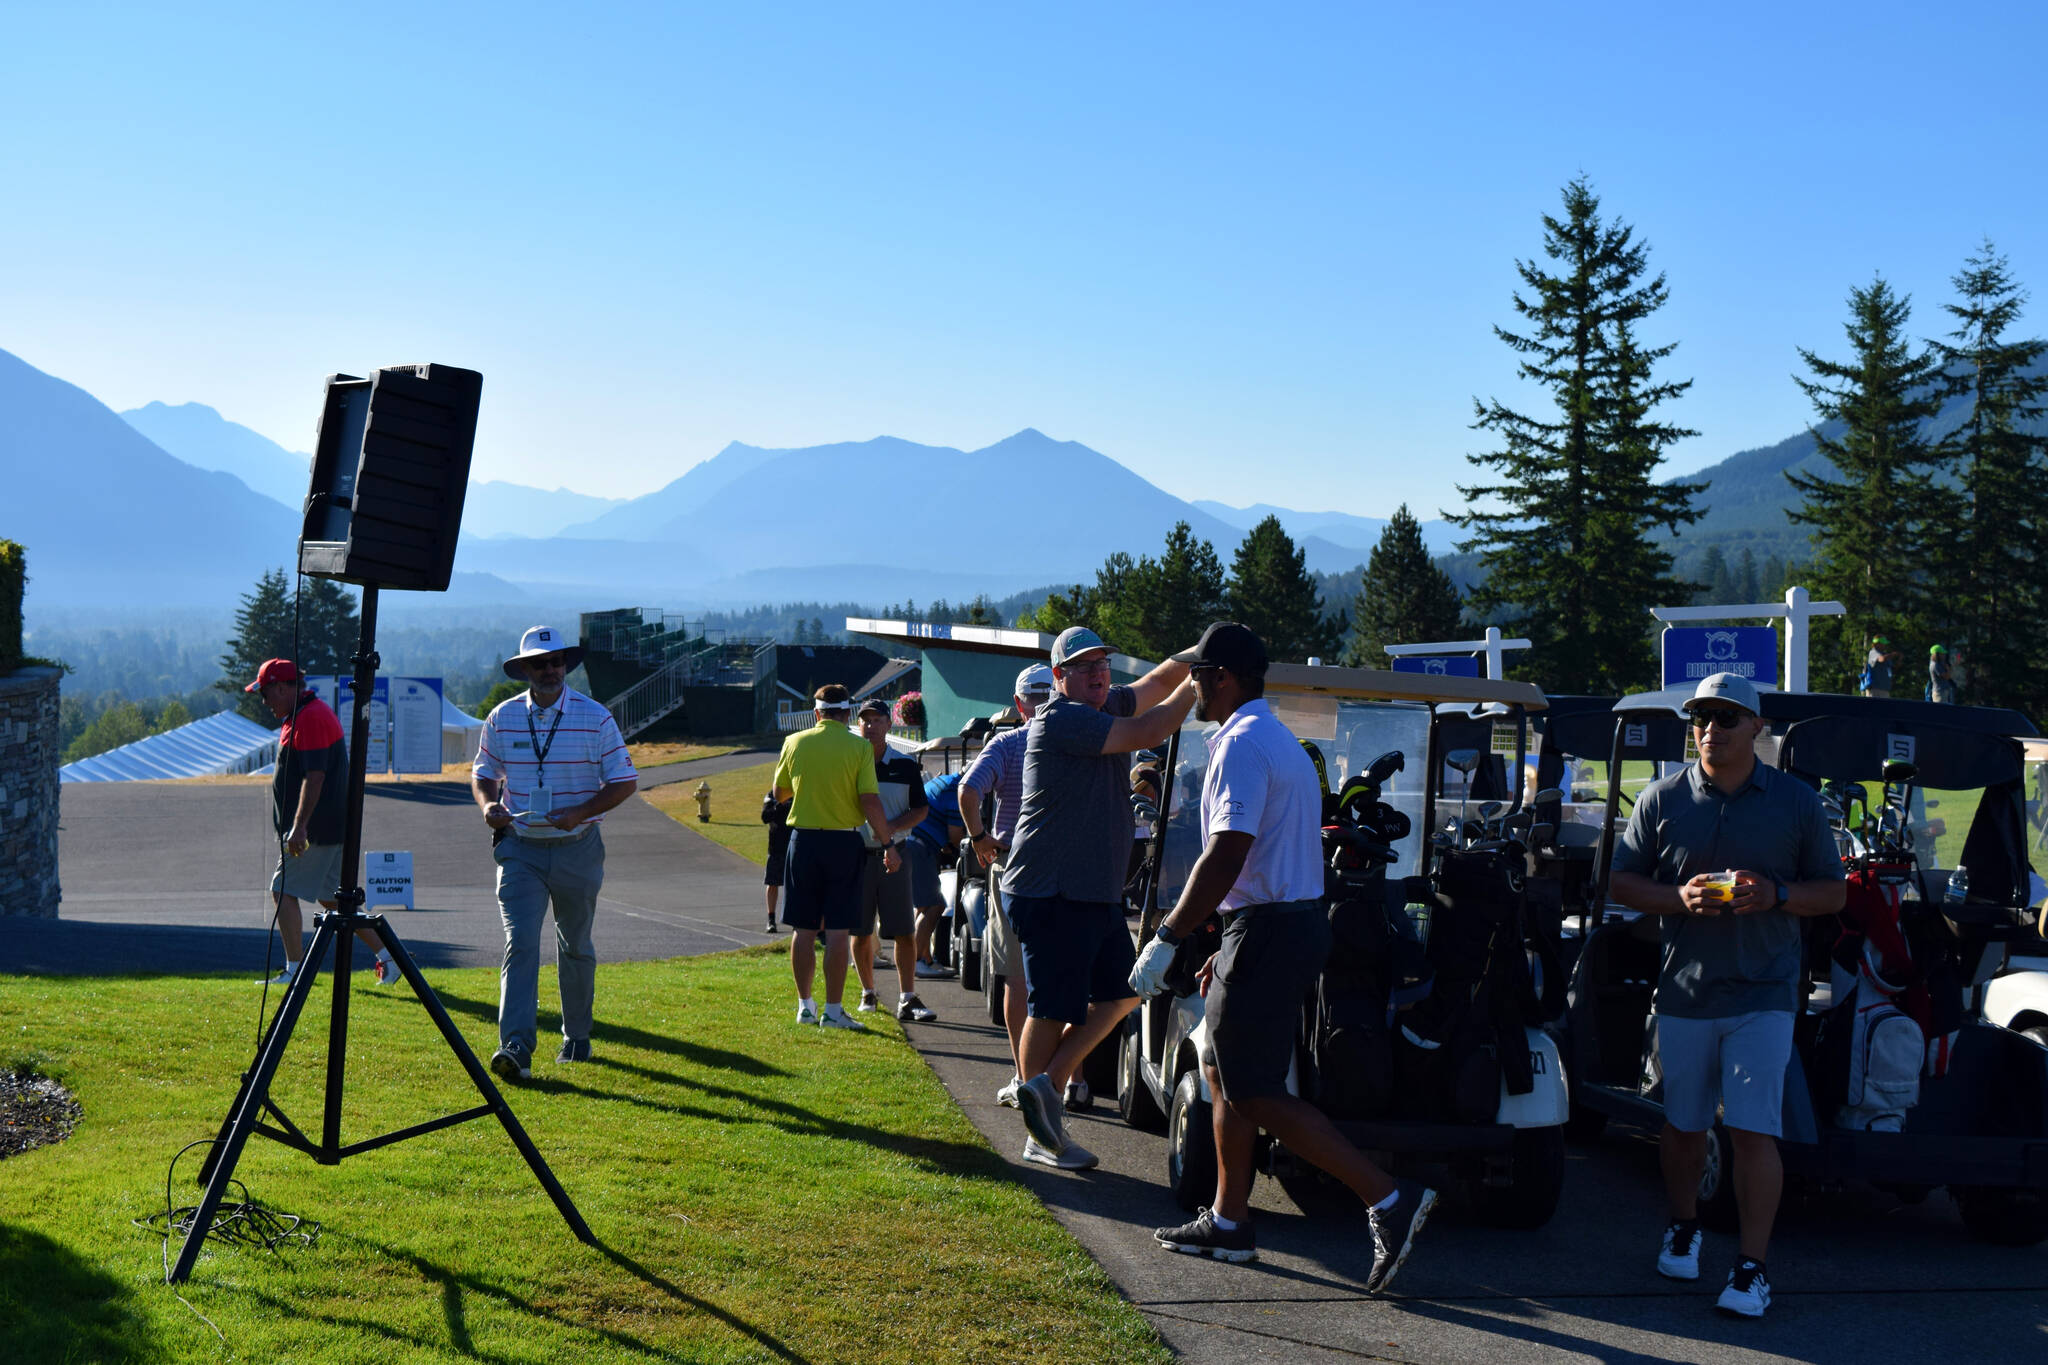 Golfers get ready for the Seahawks Rumble at the The Ridge charity fundraiser on Aug. 8. Photo by Conor Wilson/Valley Record